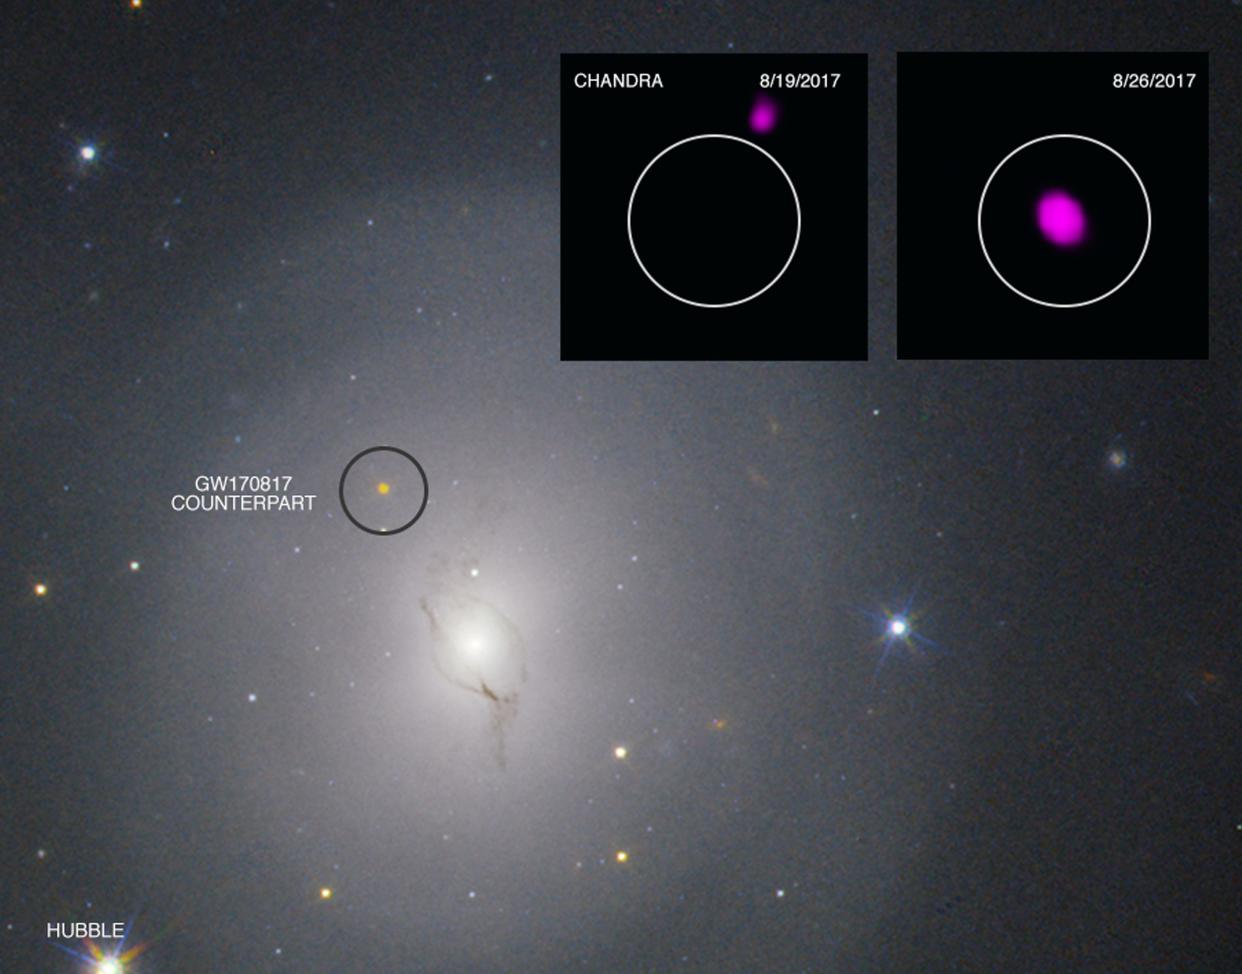 wide snapshot of space with a yellow light circled and two breakouts zooming into the circle showing the area completely dark on August 19, then lighting up bright purple on August 26